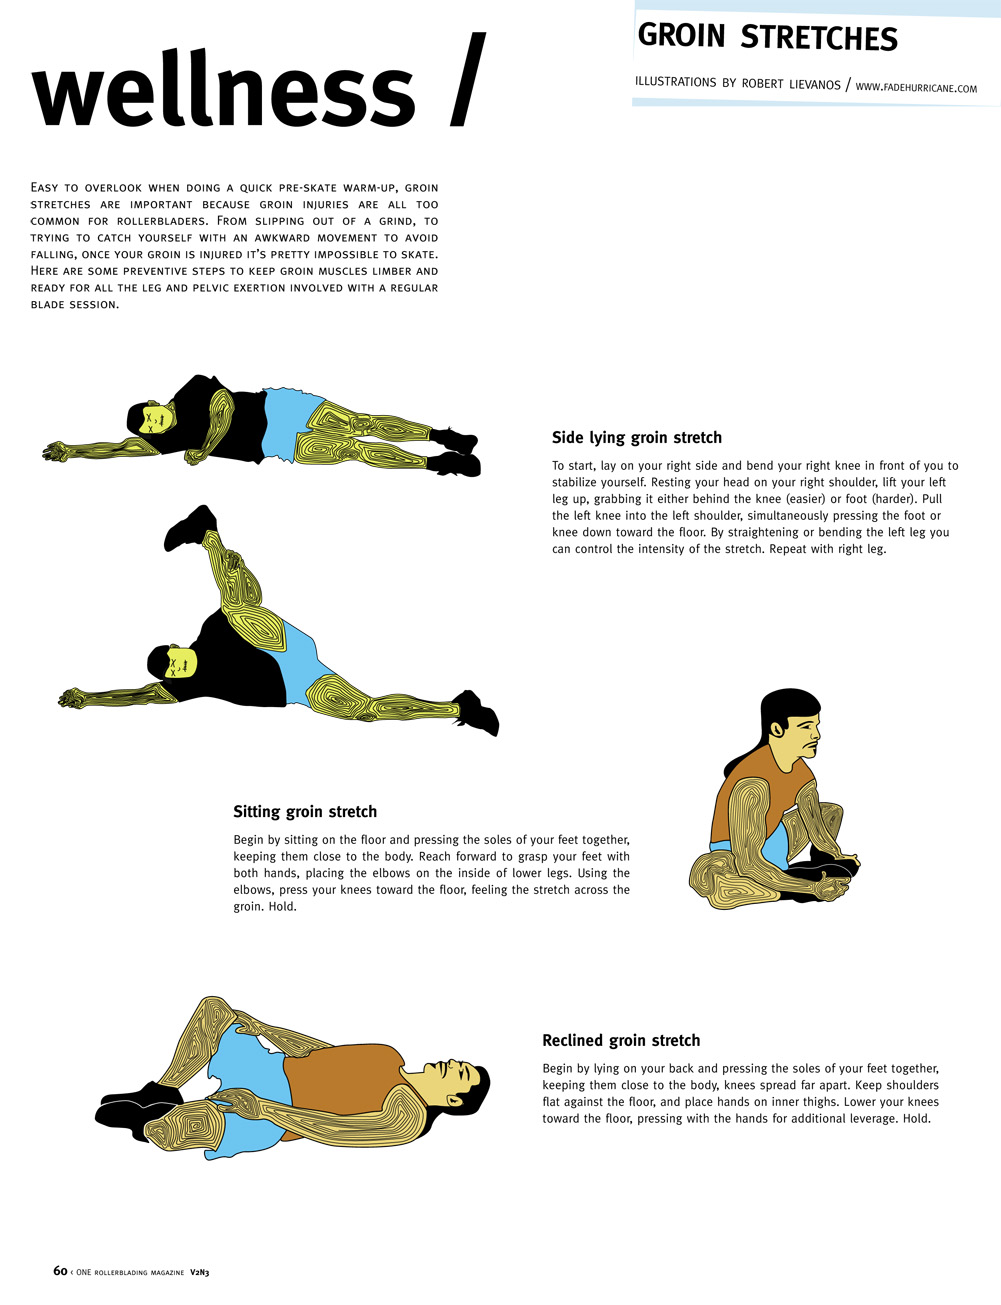 #5: Groin Stretches